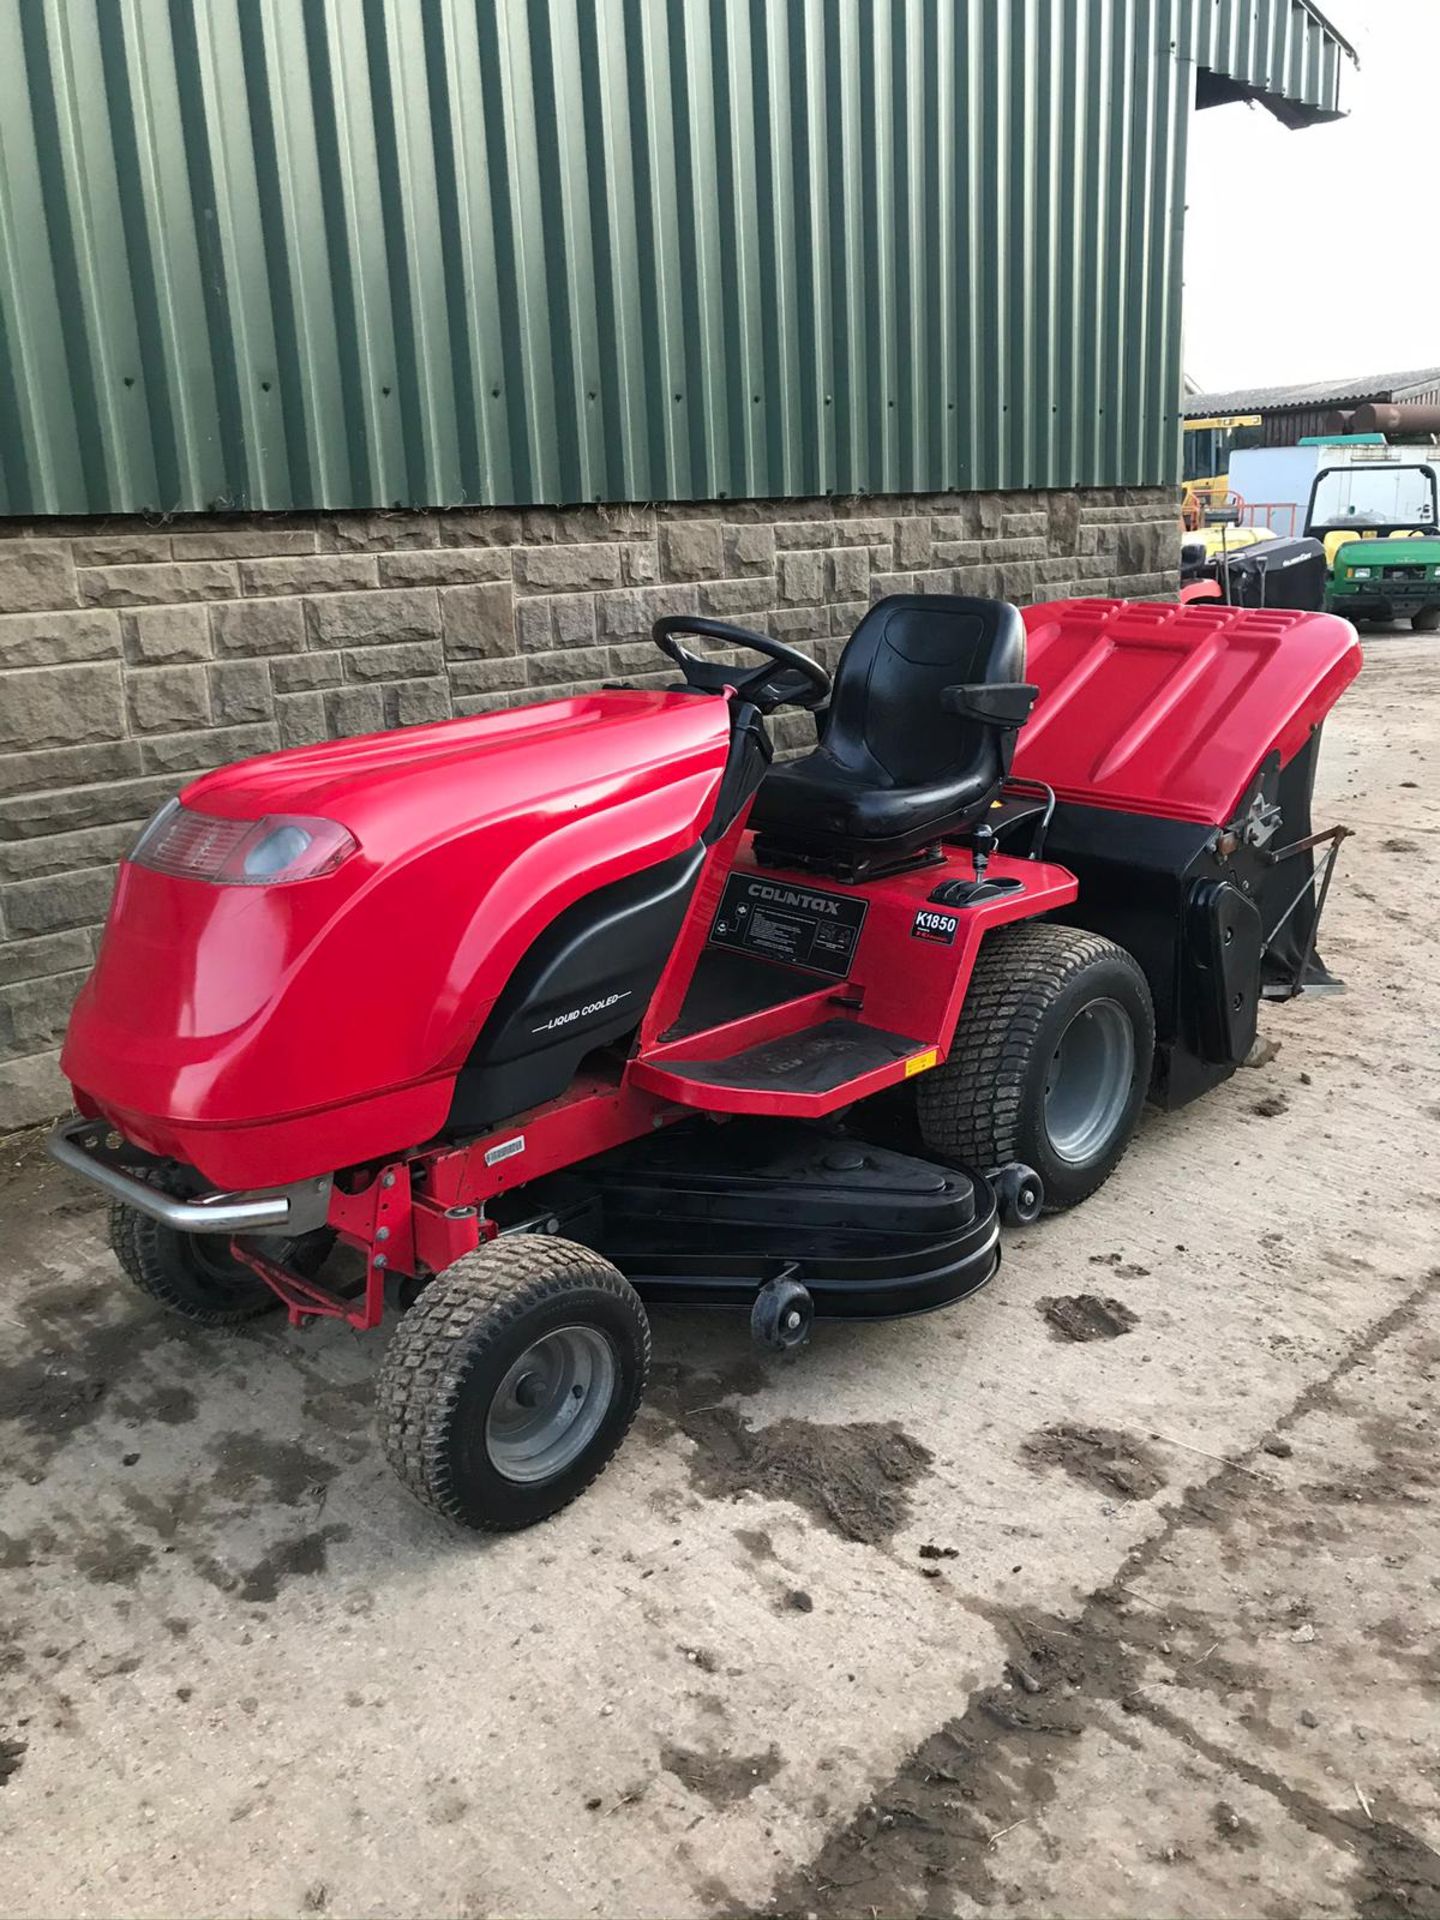 COUNTAX K1850 RIDE ON LAWN MOWER, RUNS, DRIVES AND CUTS, CLEAN MACHINE *NO VAT* - Image 2 of 4